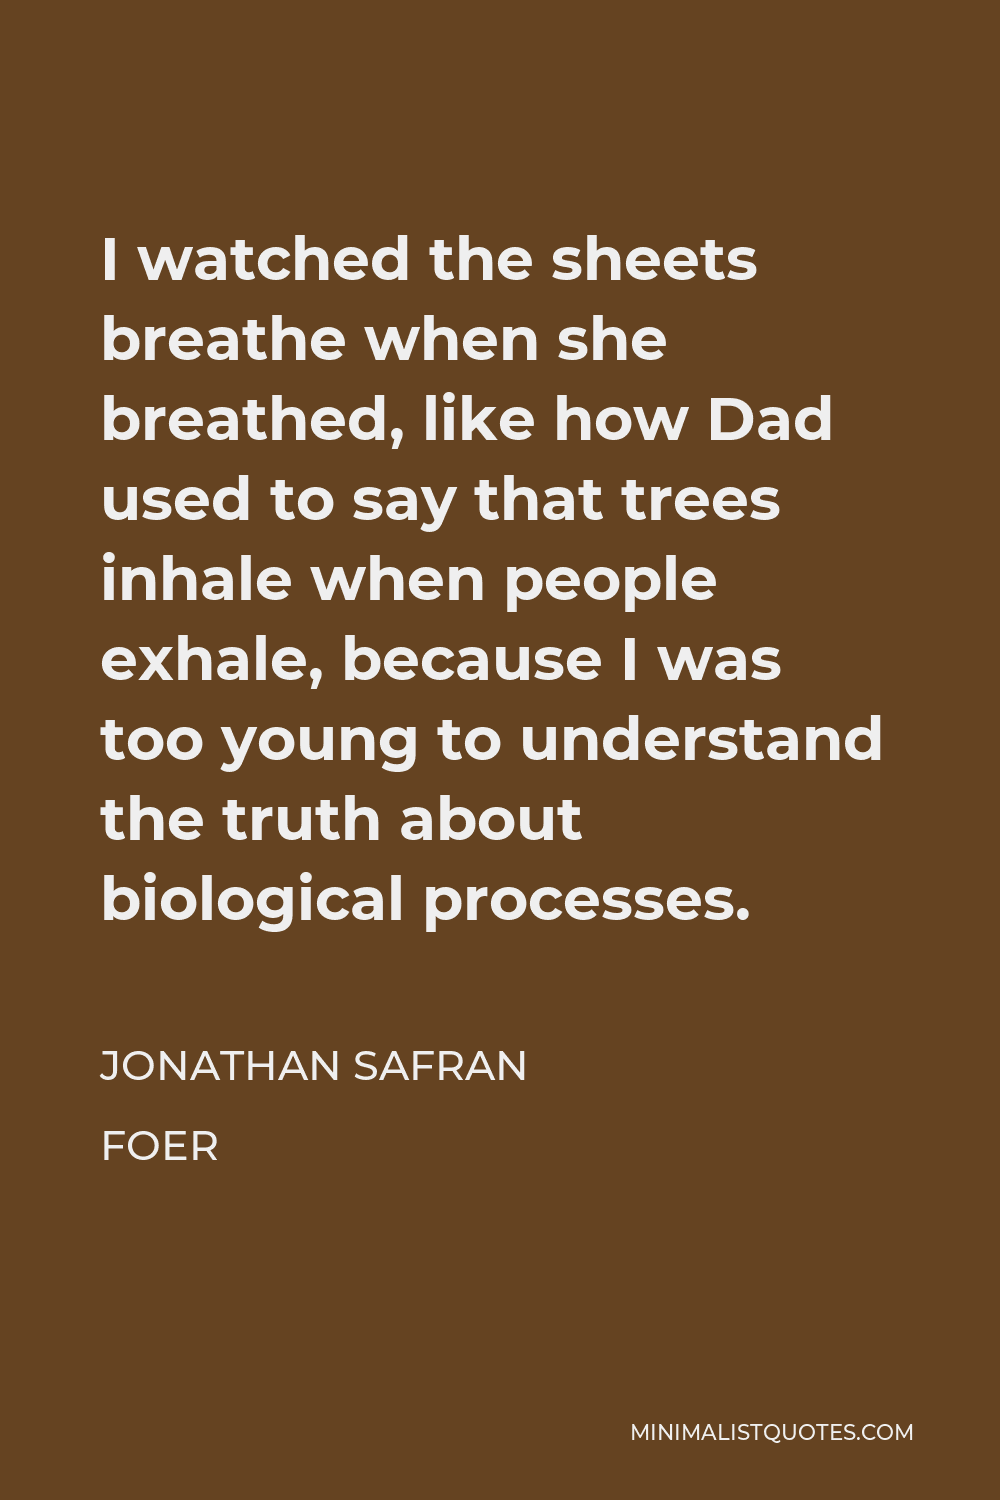 Jonathan Safran Foer Quote - I watched the sheets breathe when she breathed, like how Dad used to say that trees inhale when people exhale, because I was too young to understand the truth about biological processes.